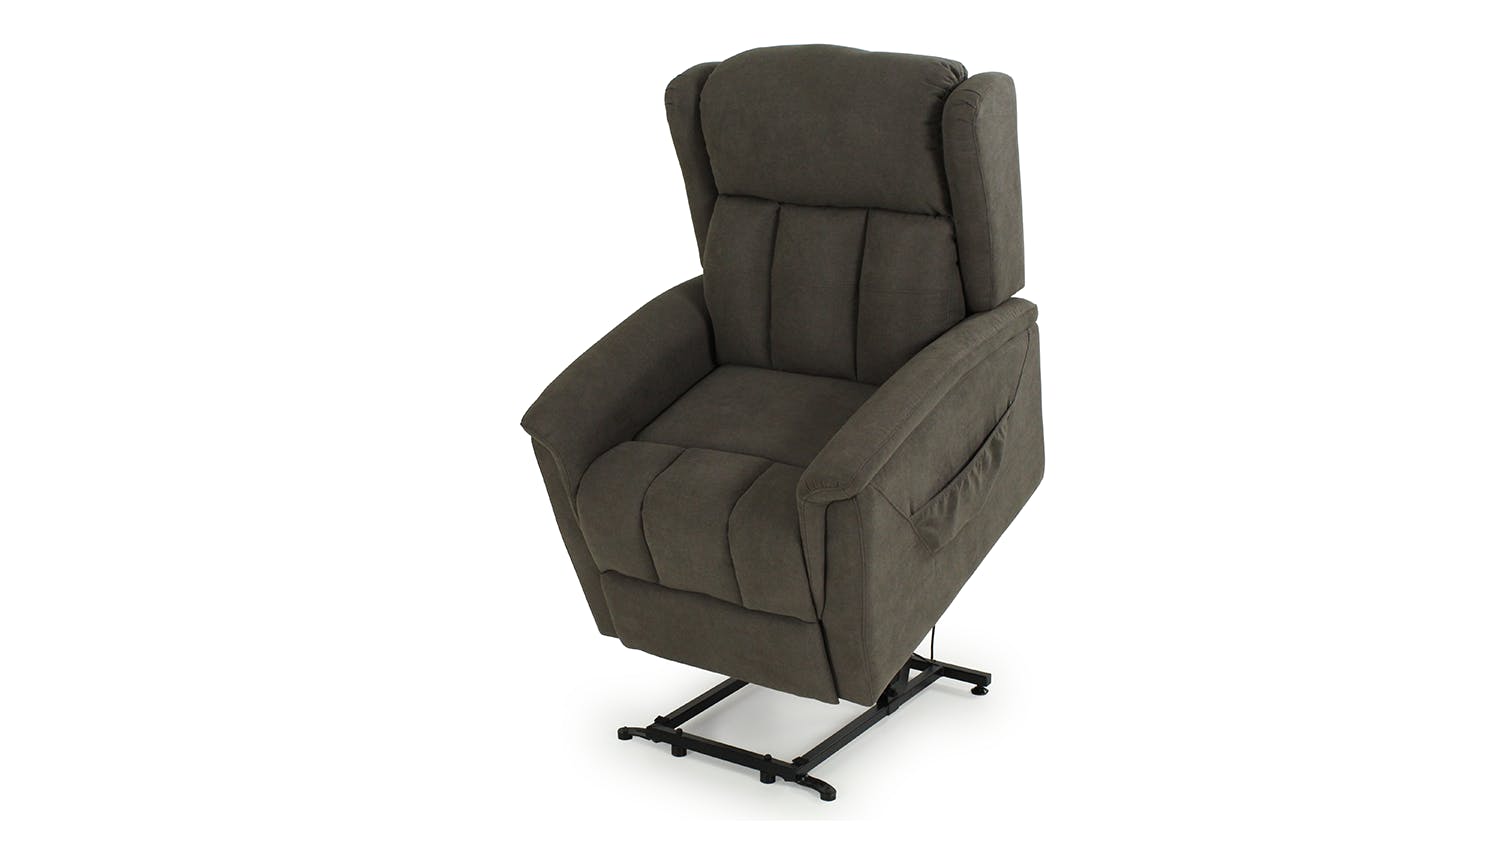 Longreef Fabric Electric Lift Recliner Chair